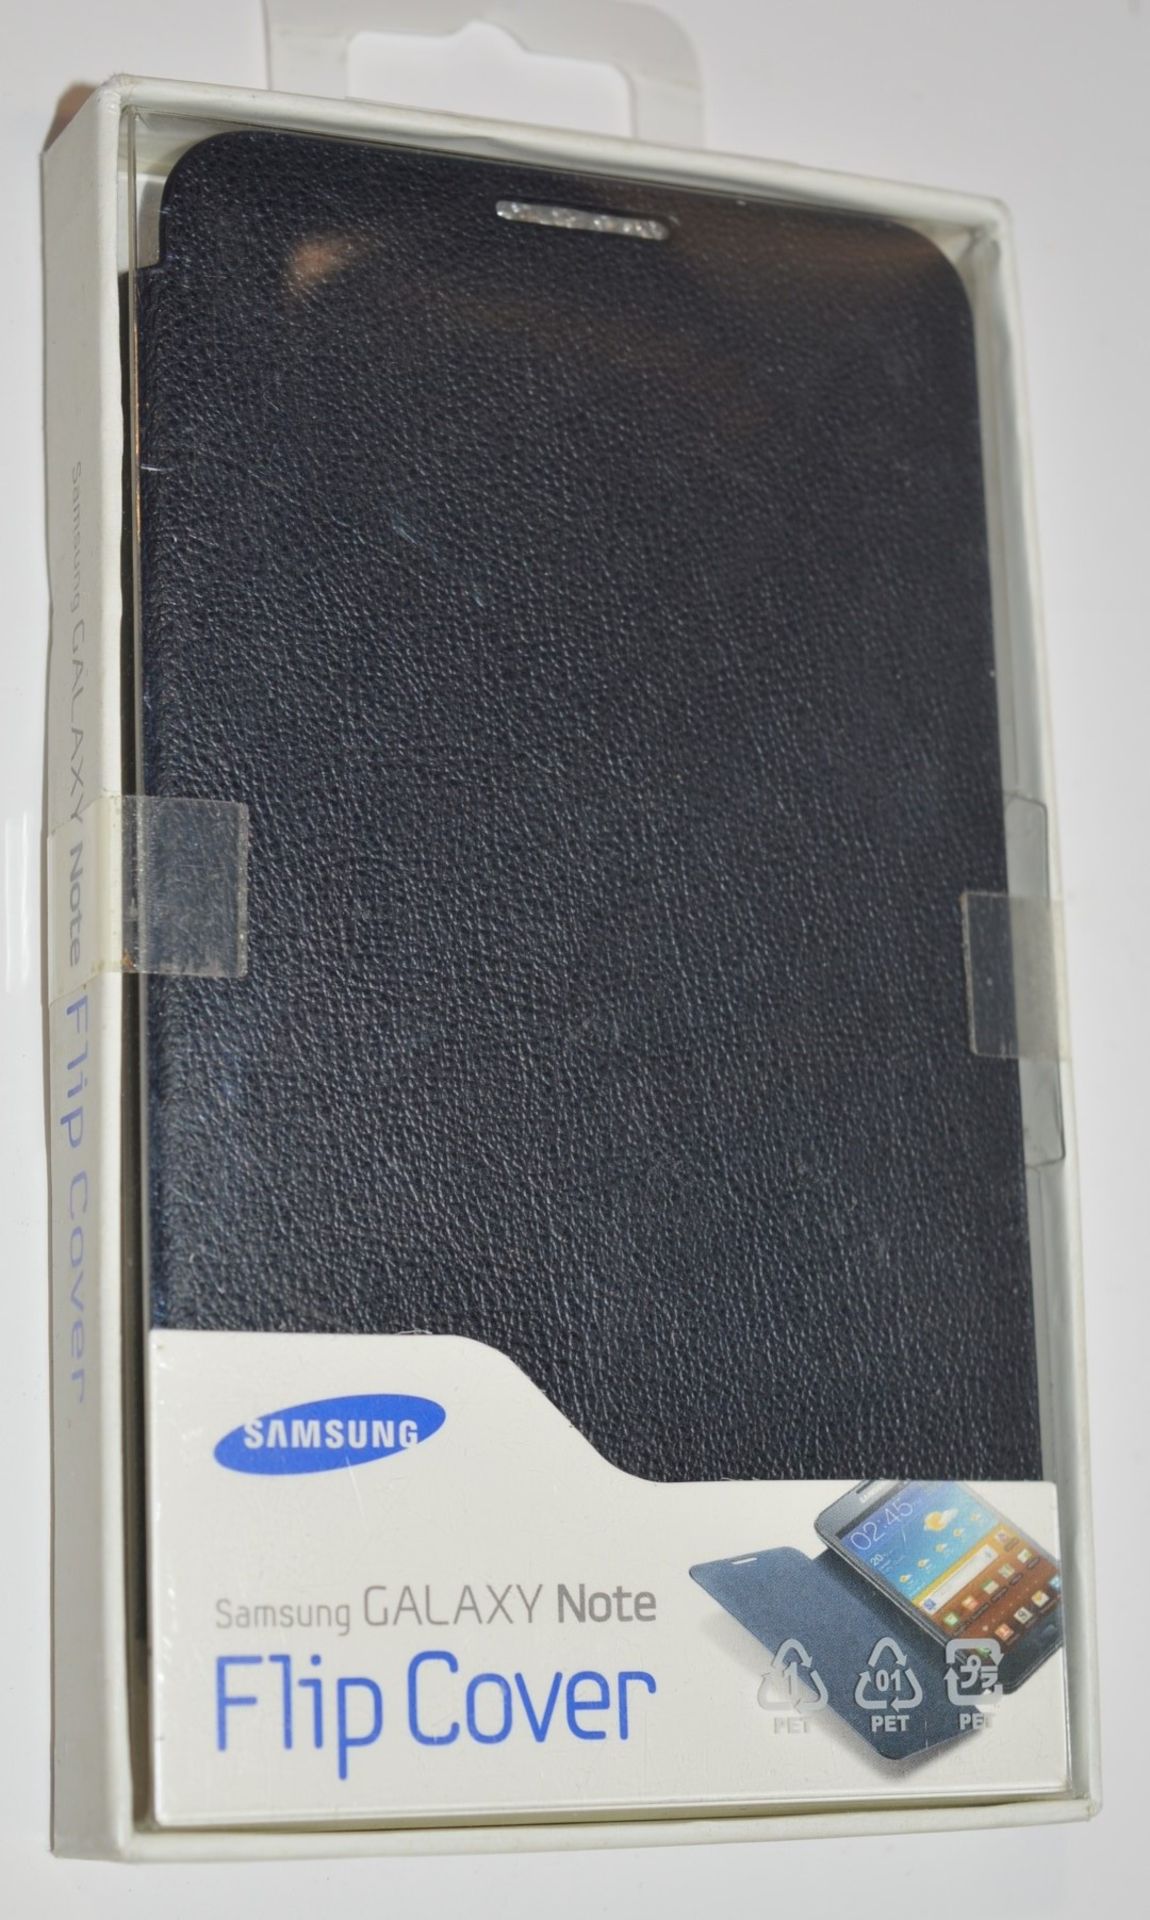 40 x Samsung Galaxy Note Flip Cover Cases - Brand New Stock - CL214 - Ref In2199 - Location: - Image 2 of 6